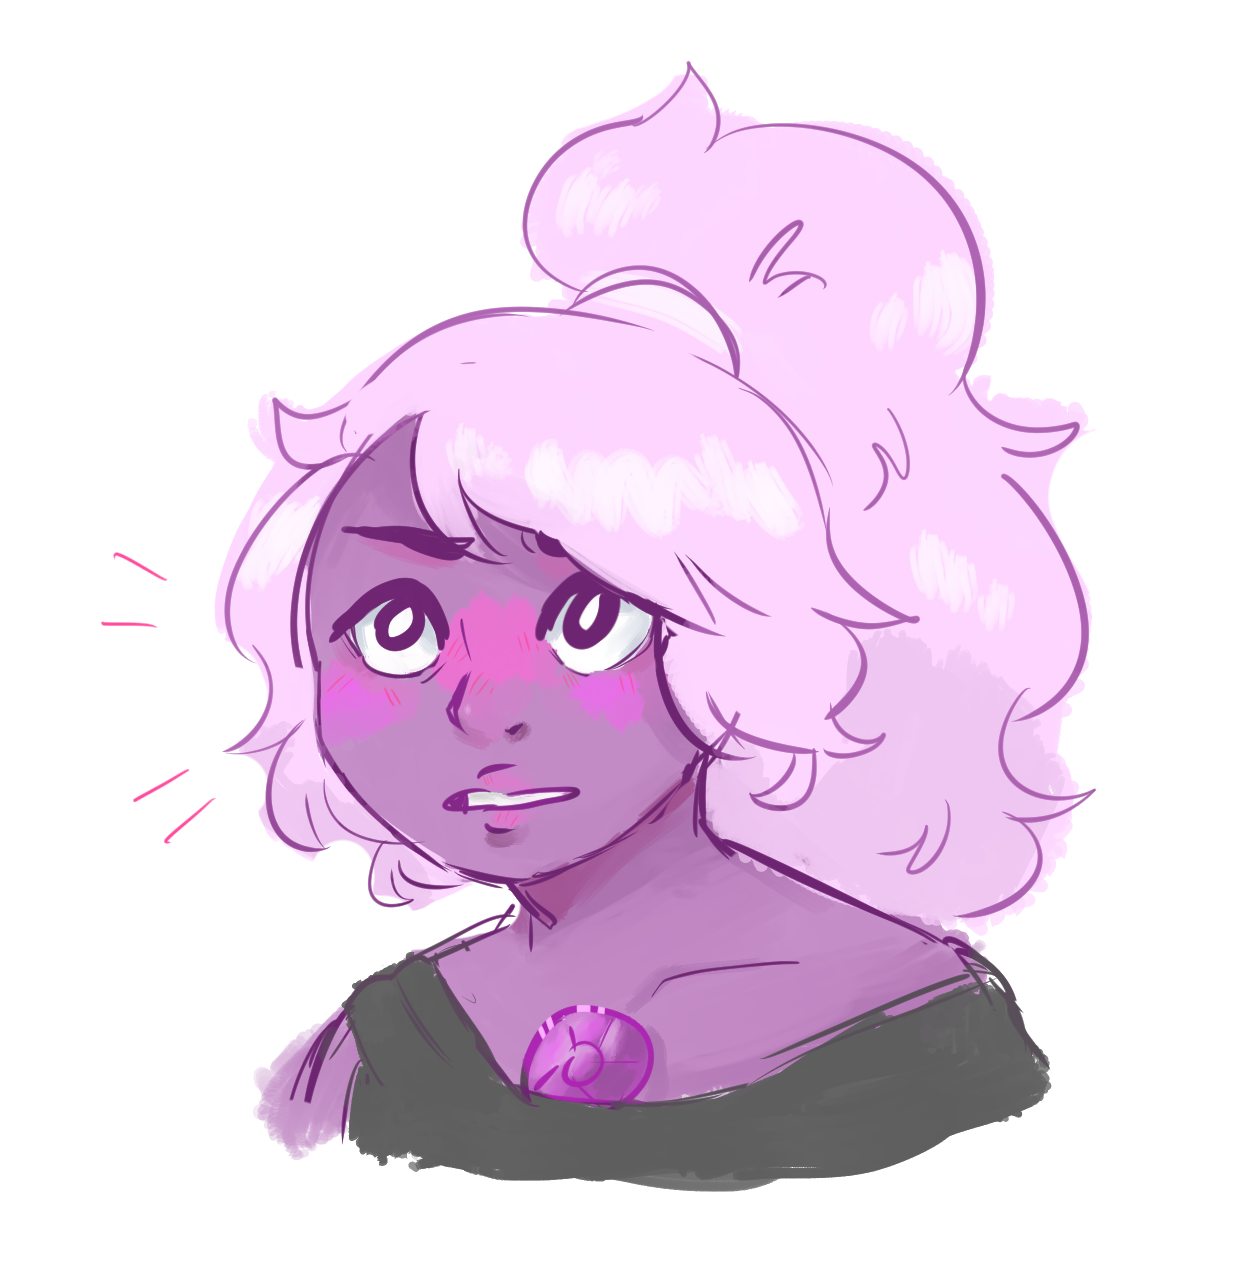 A really messy Amethyst doodle